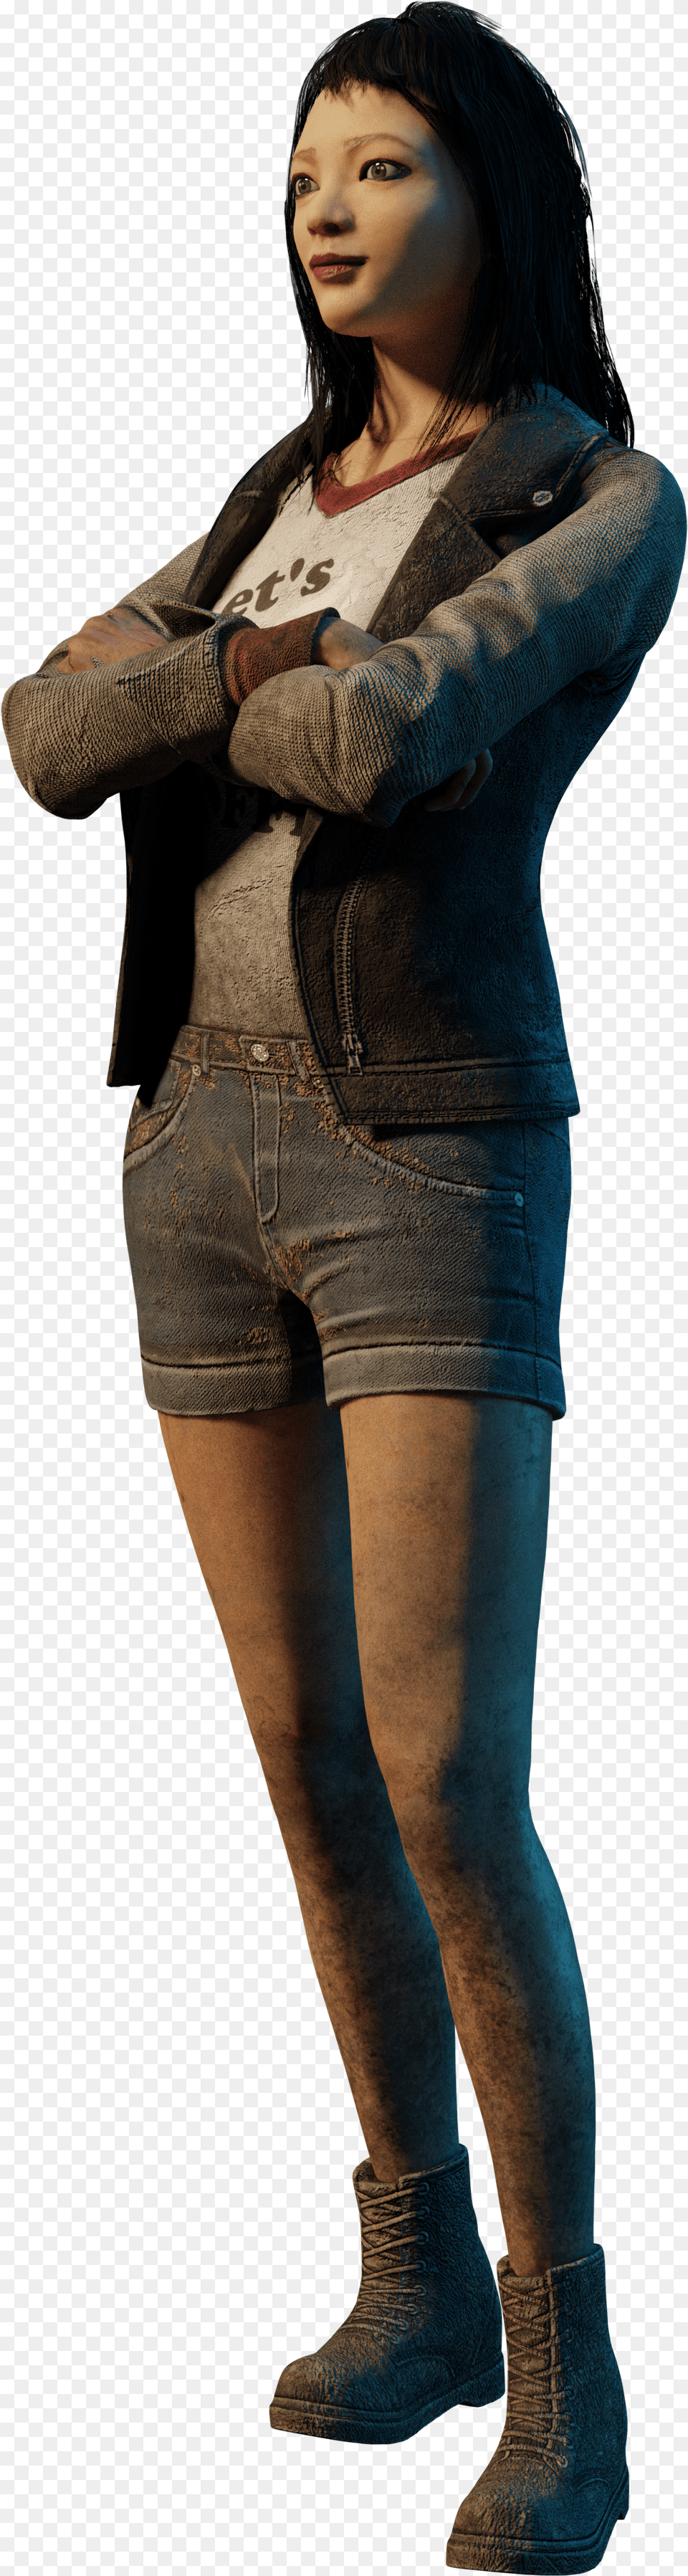 Dead By Daylight Free Png